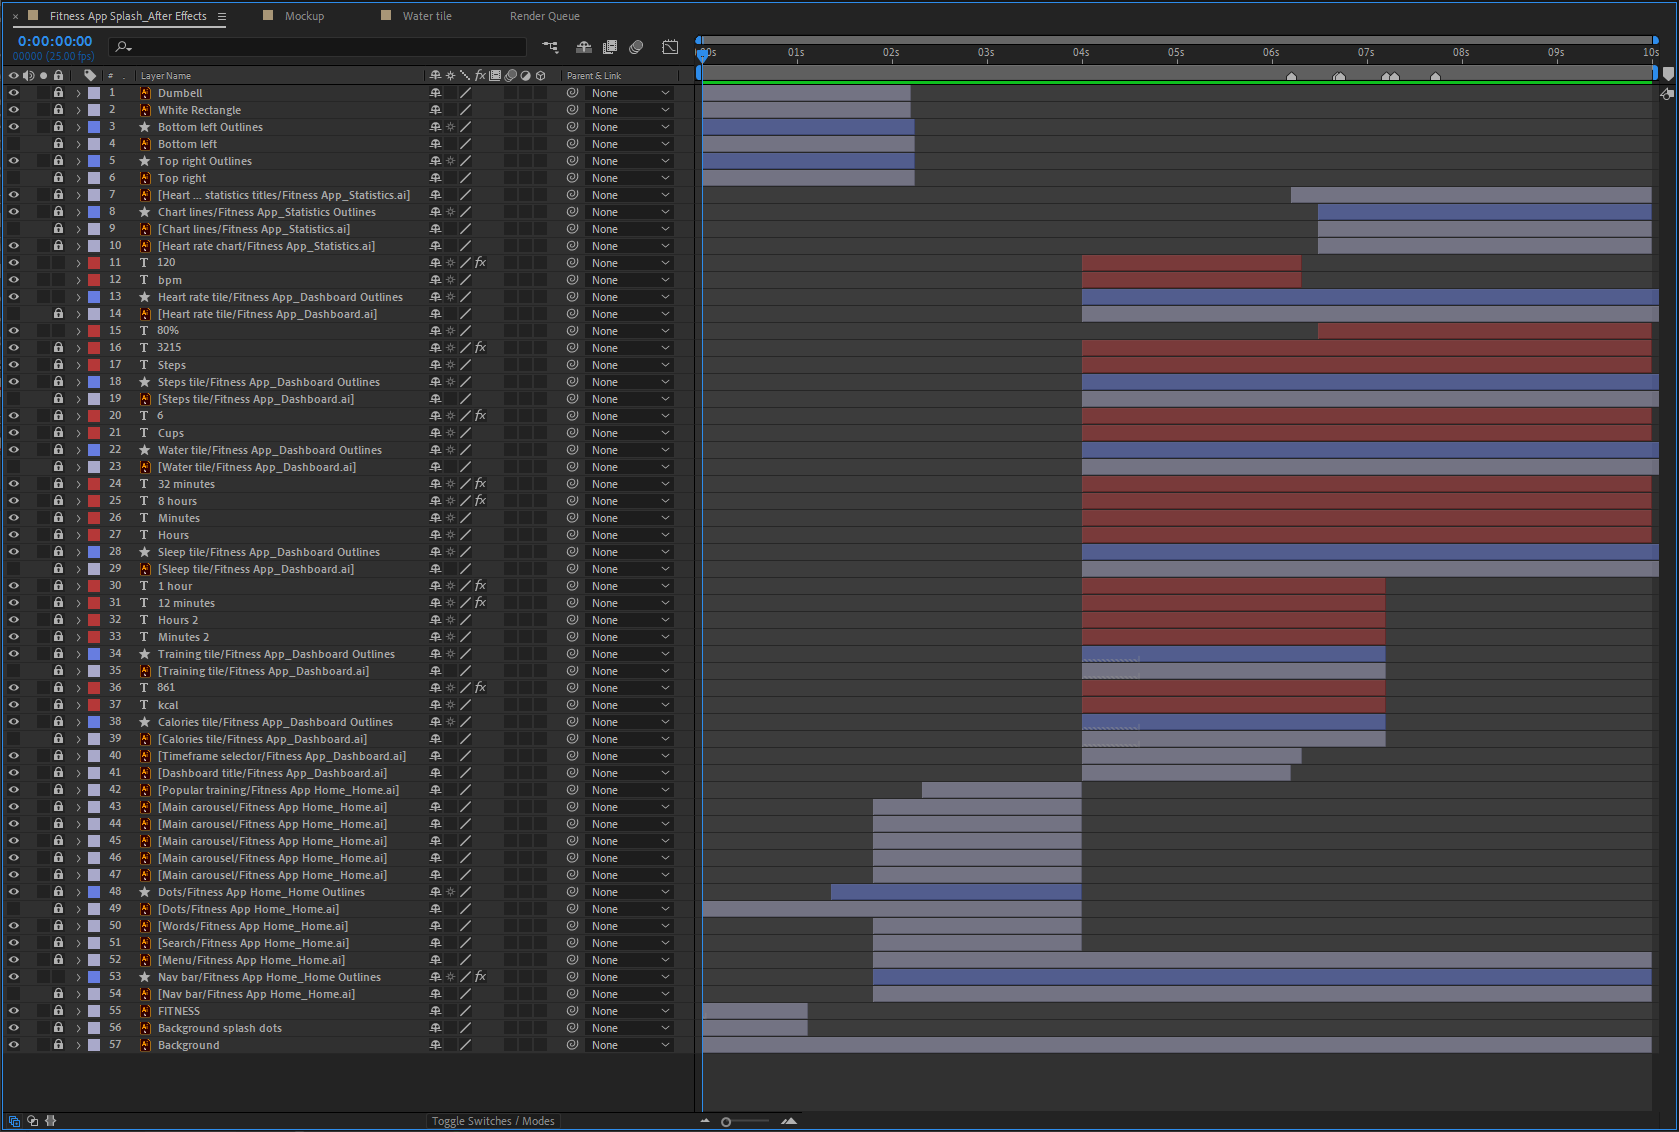 A screenshot of the fitness app motion design project timeline in Adobe After Effects.